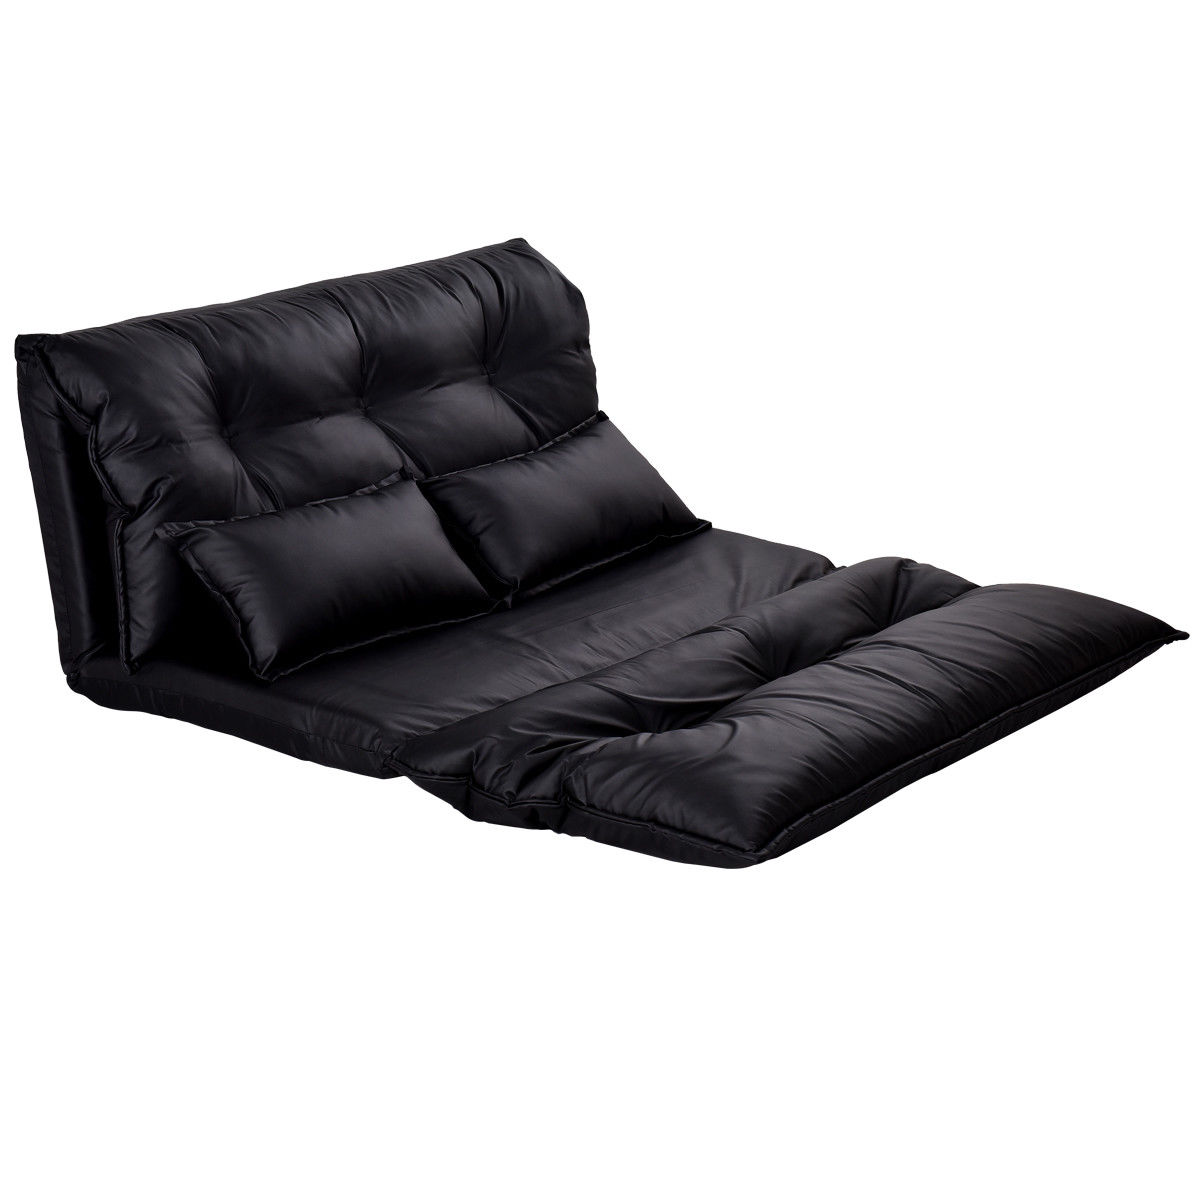 Costway PU Leather Foldable Modern Leisure Floor Sofa Bed Video Gaming 2 Pillows Black - image 3 of 7